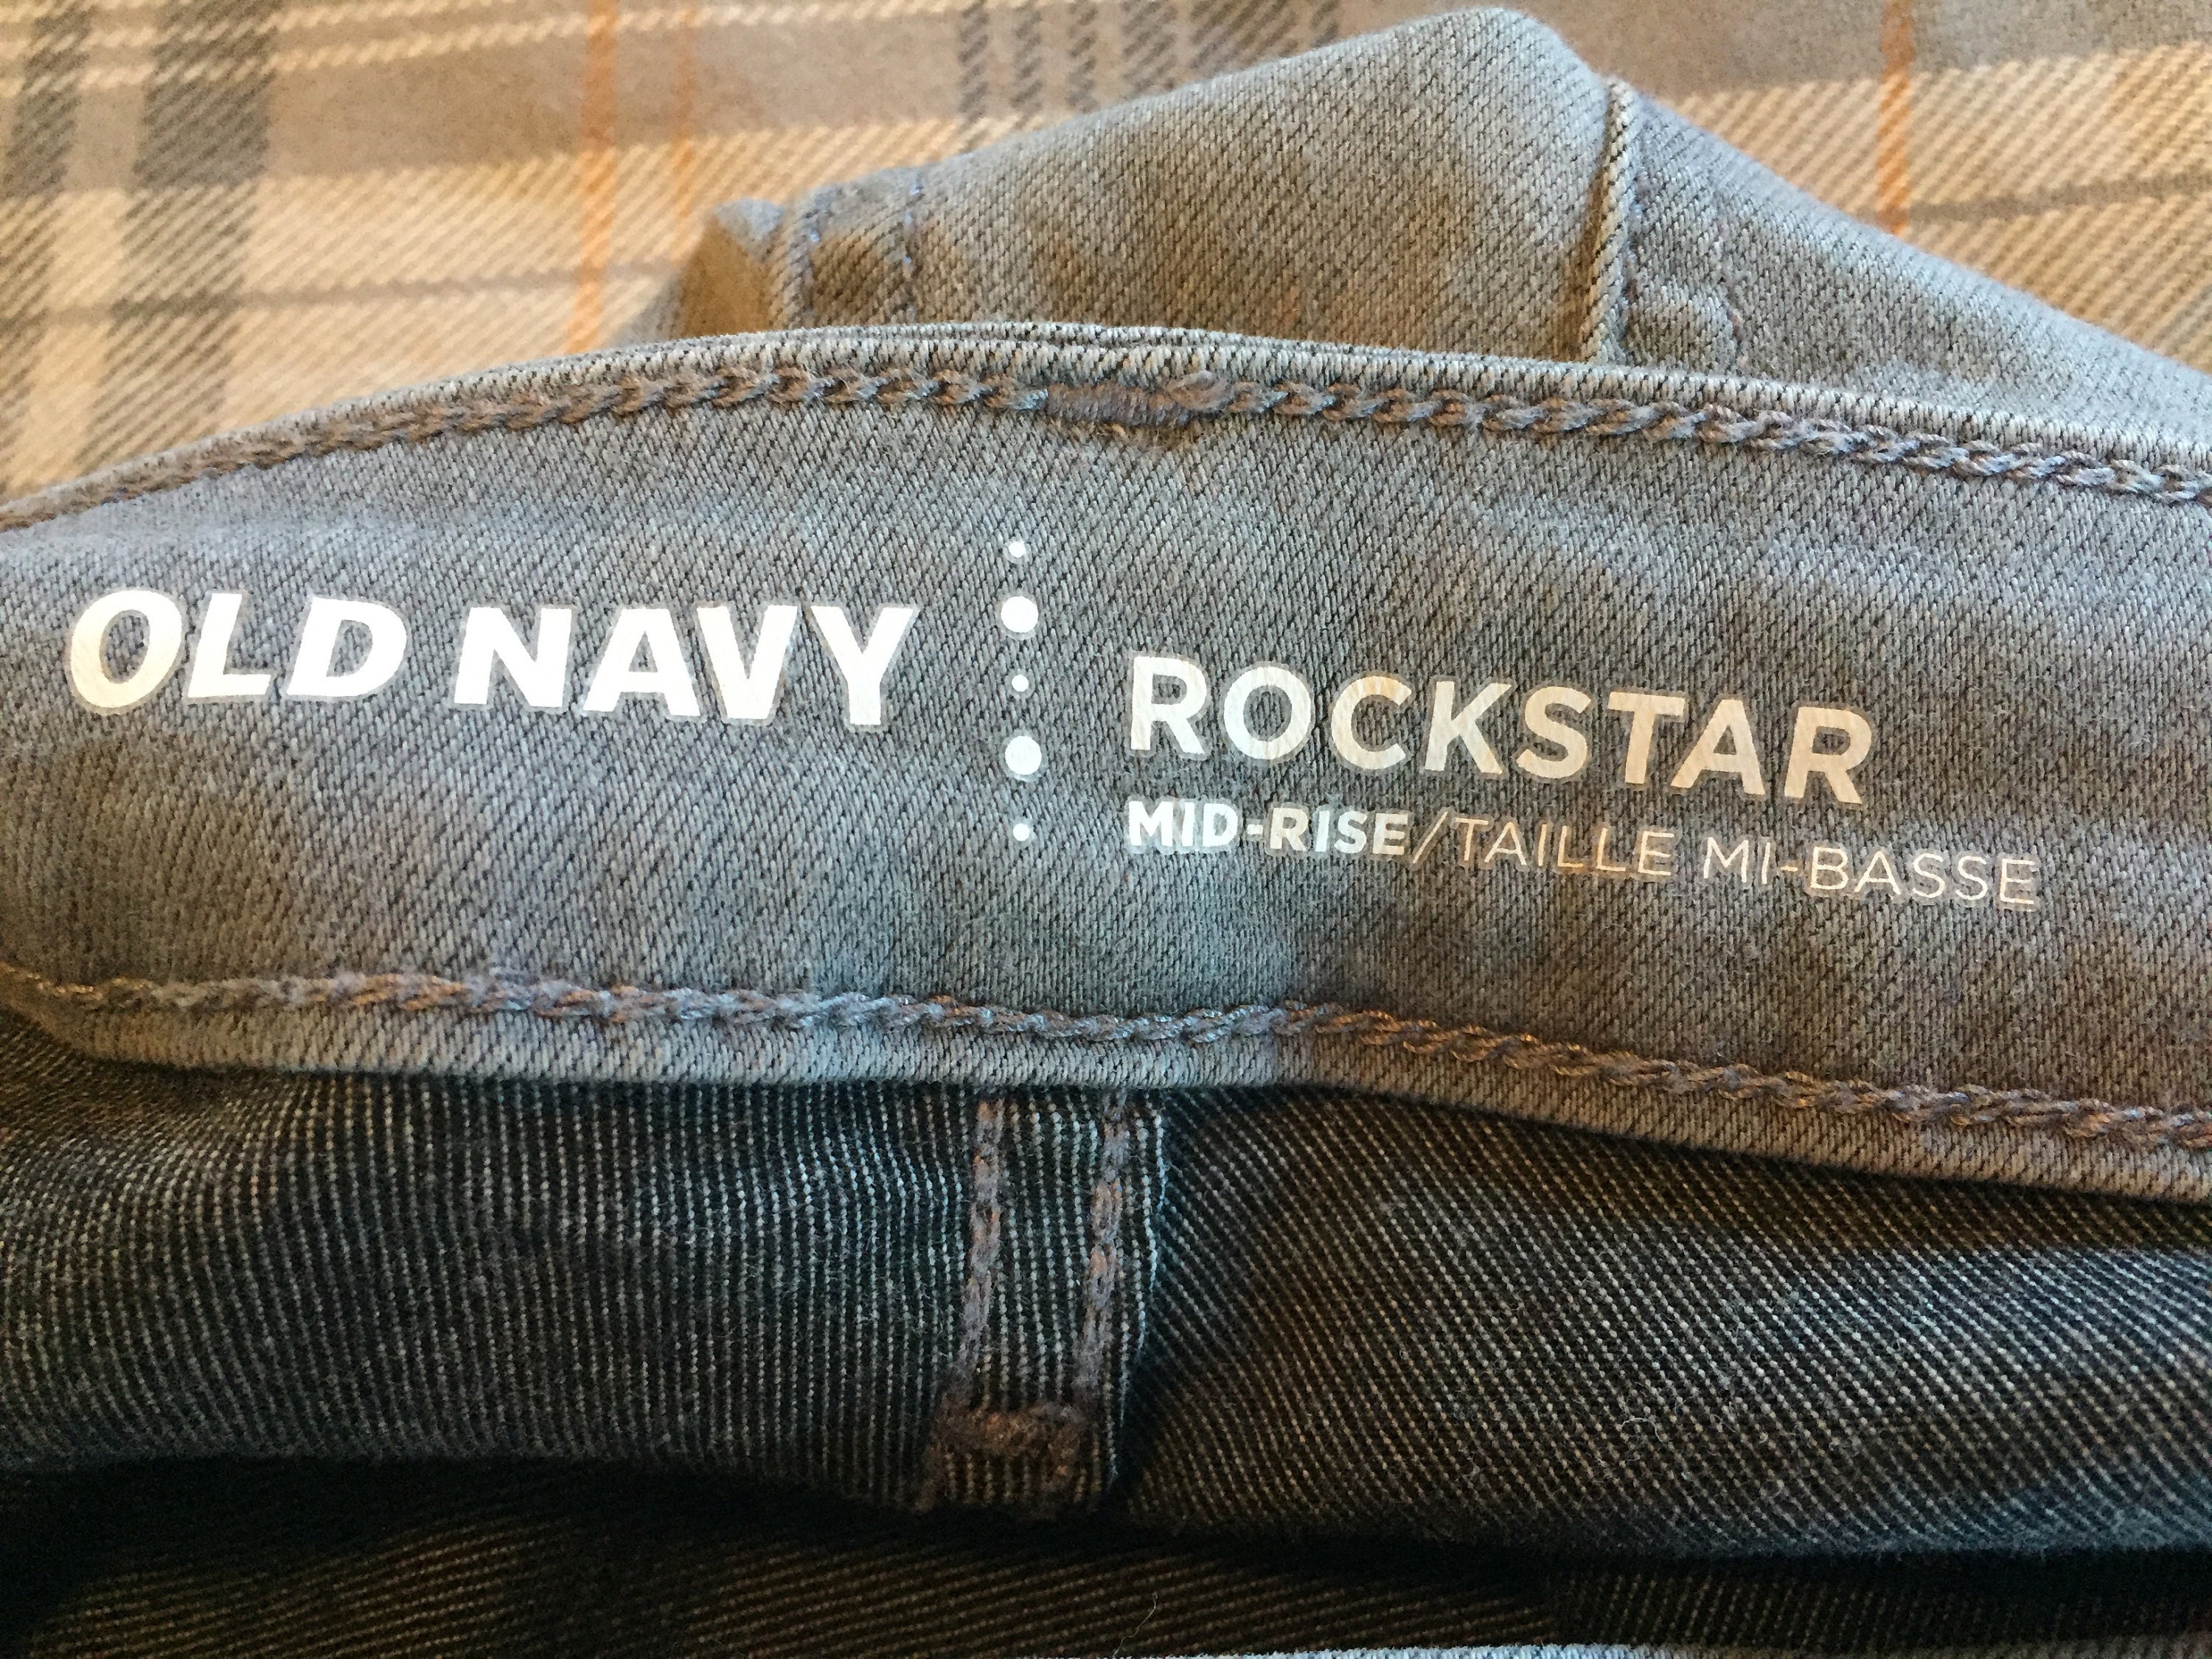 Women's Old Navy rockstar Jeans Washed Out Black Color Mid Rise